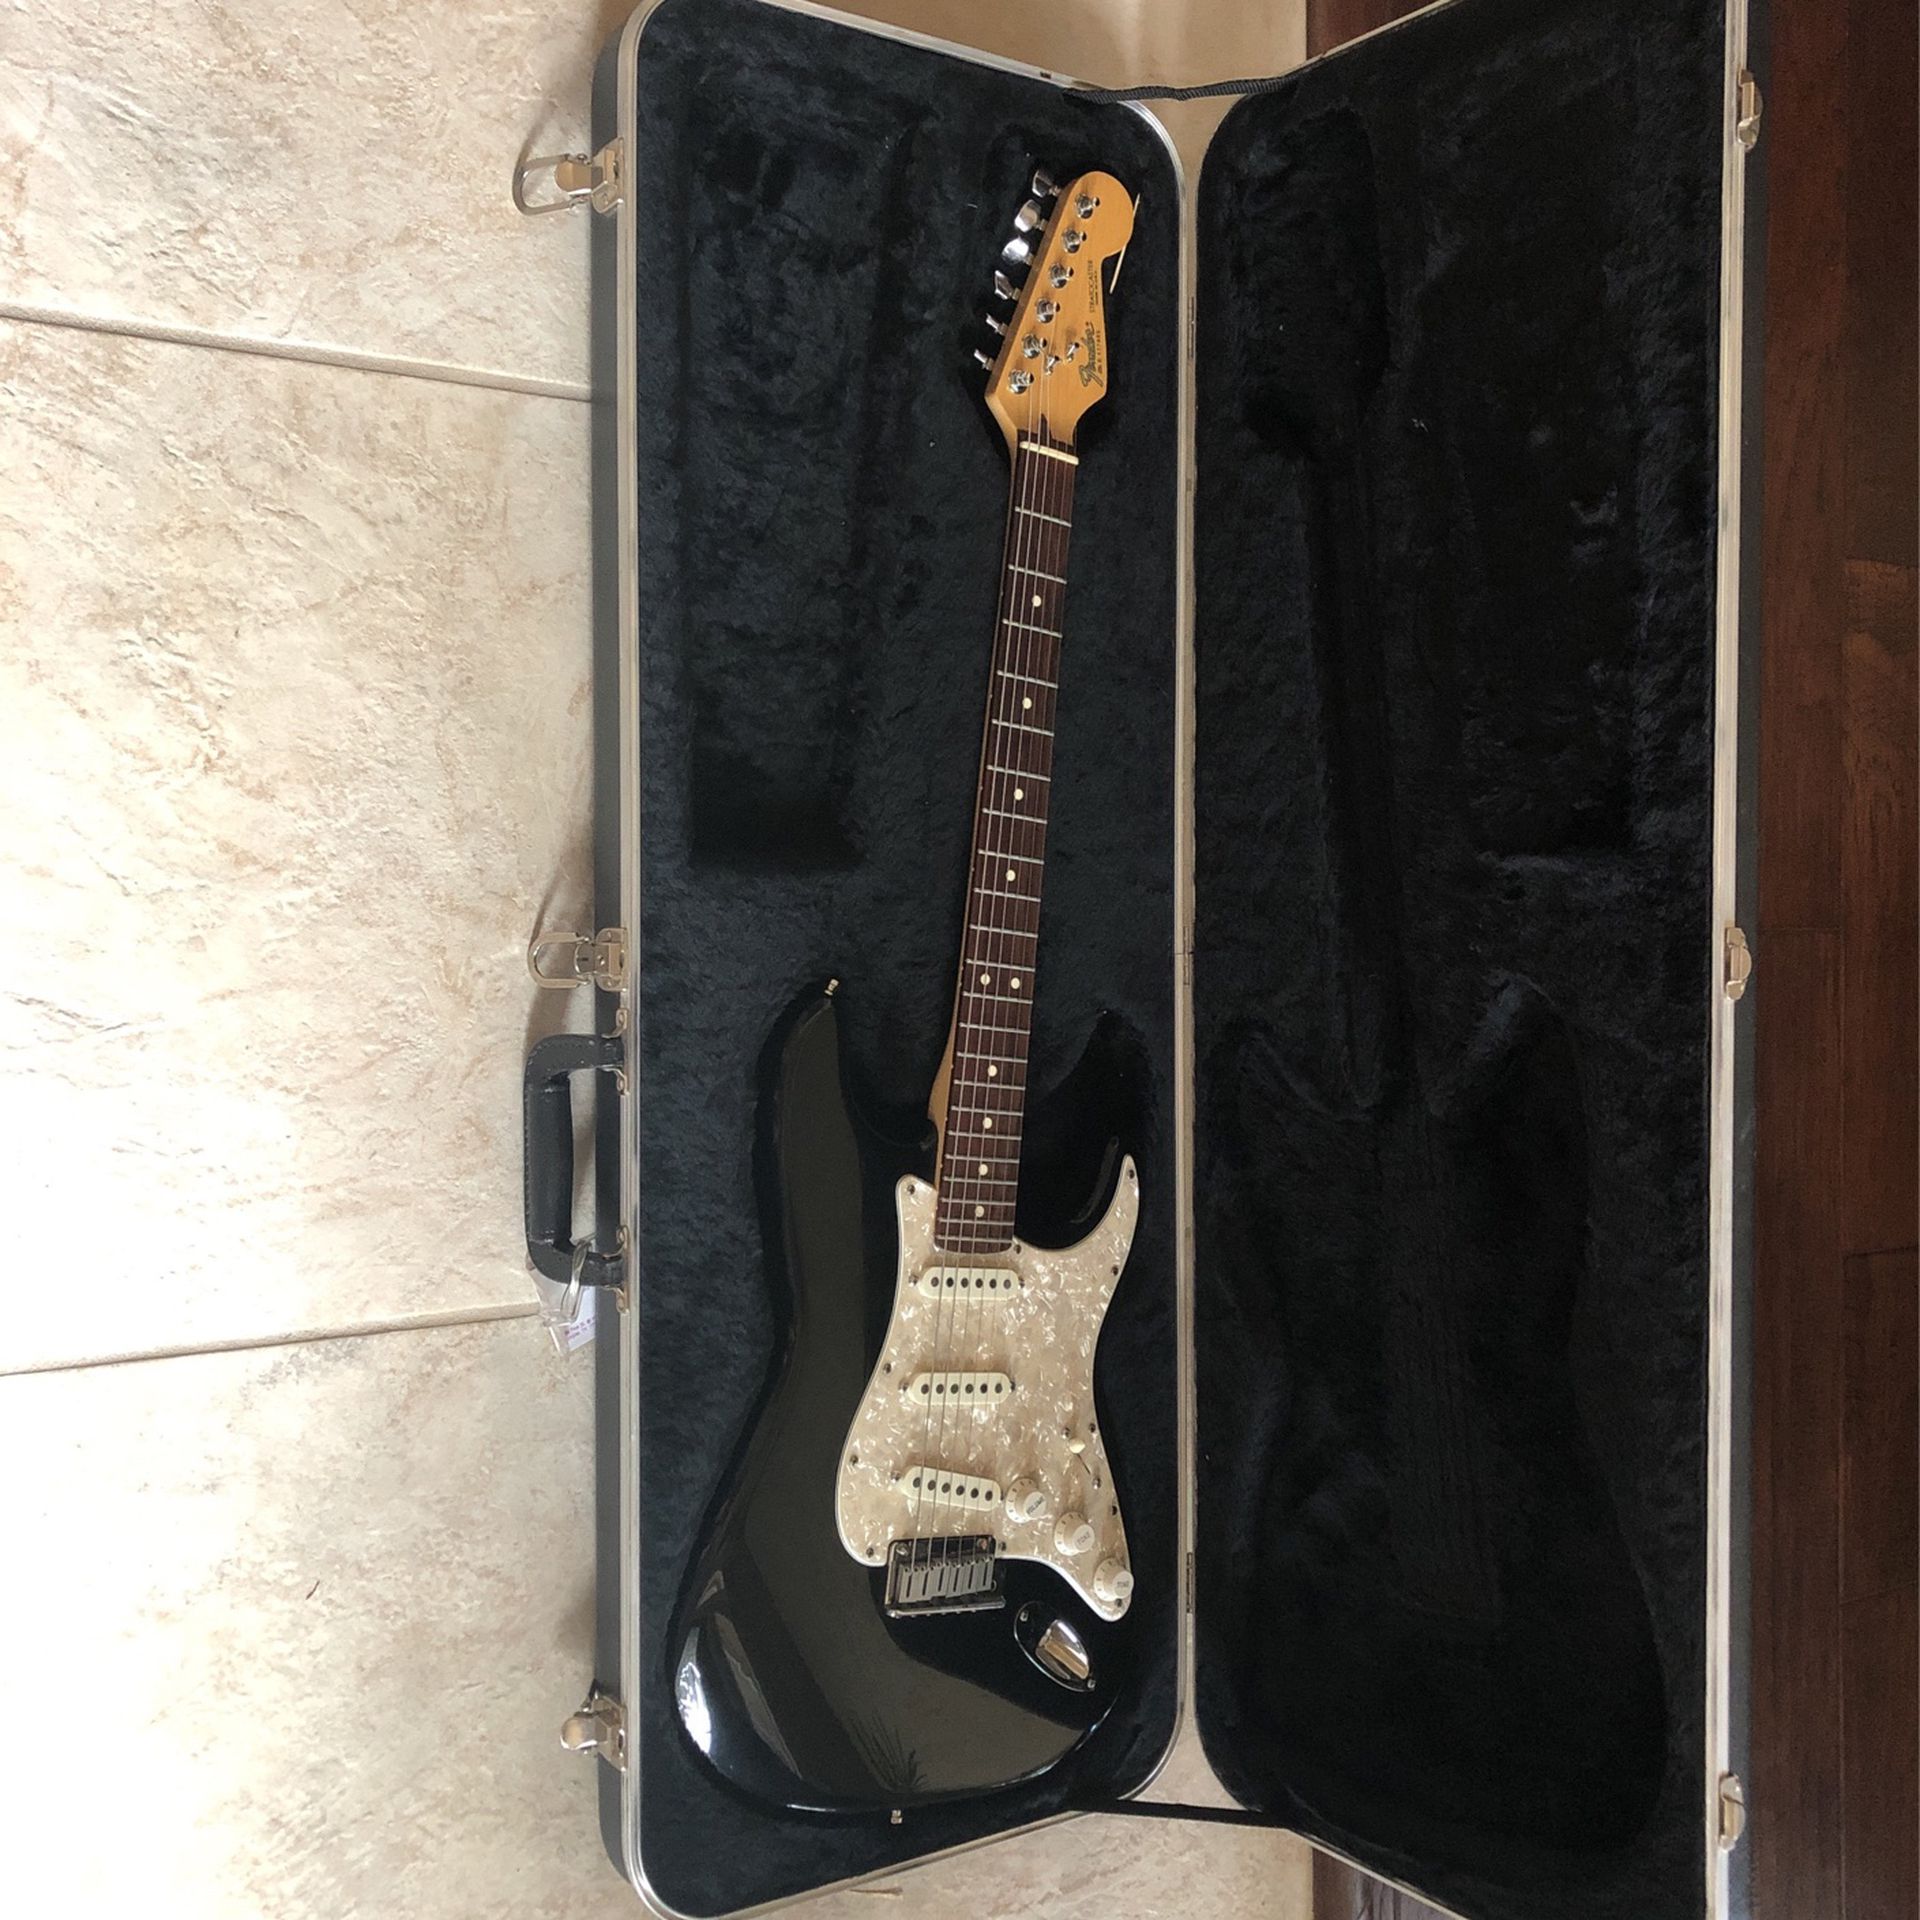 1984 American made Stratocaster